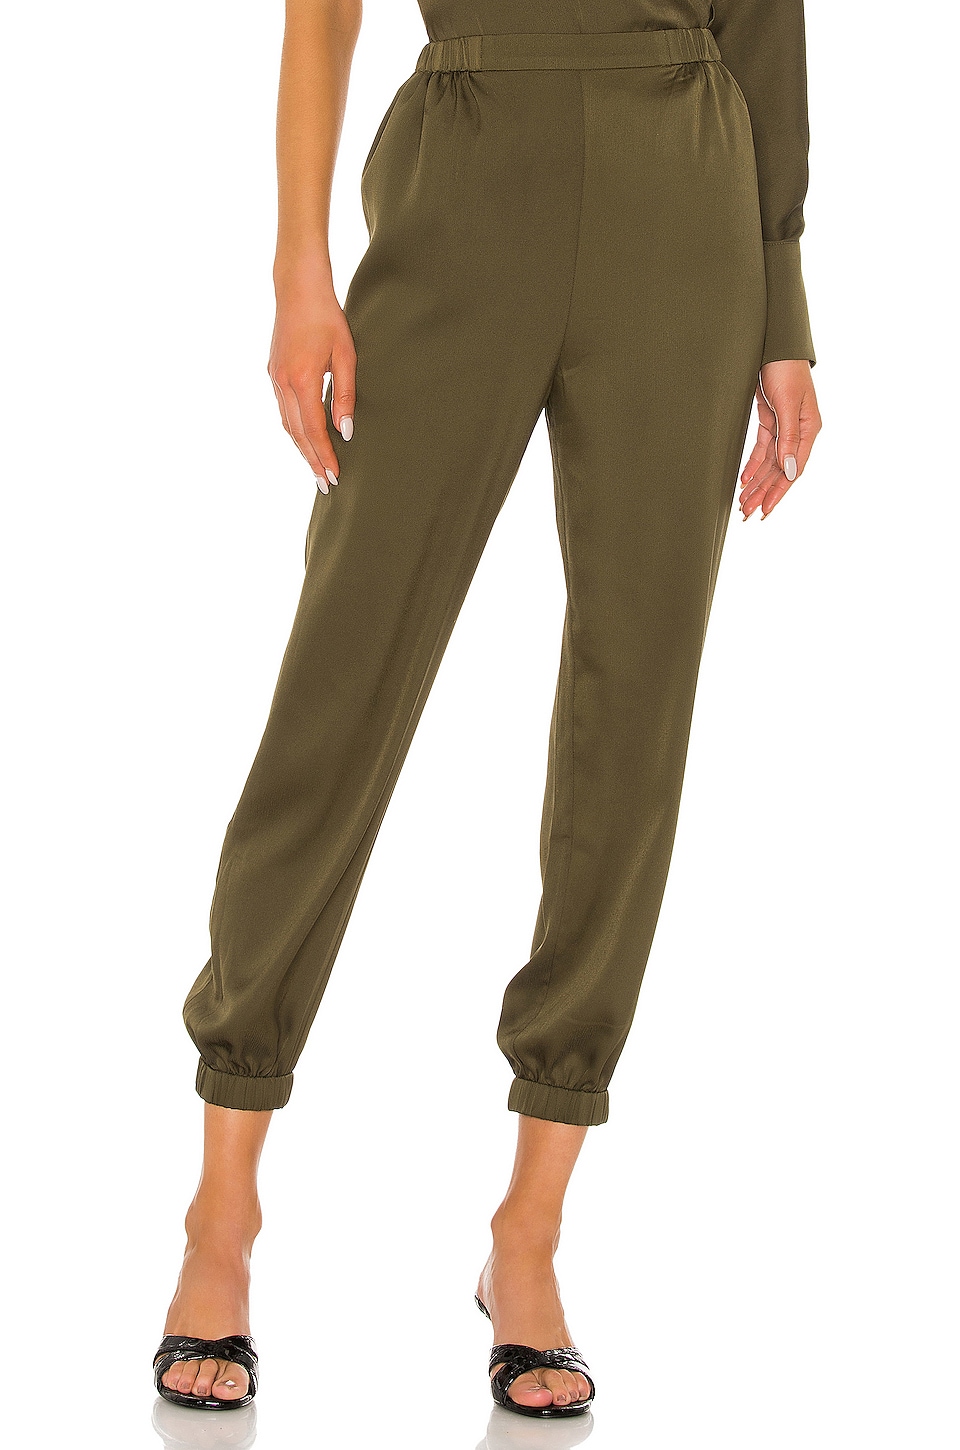 L'Academie The Reina Crop Pant in Olive Green | REVOLVE